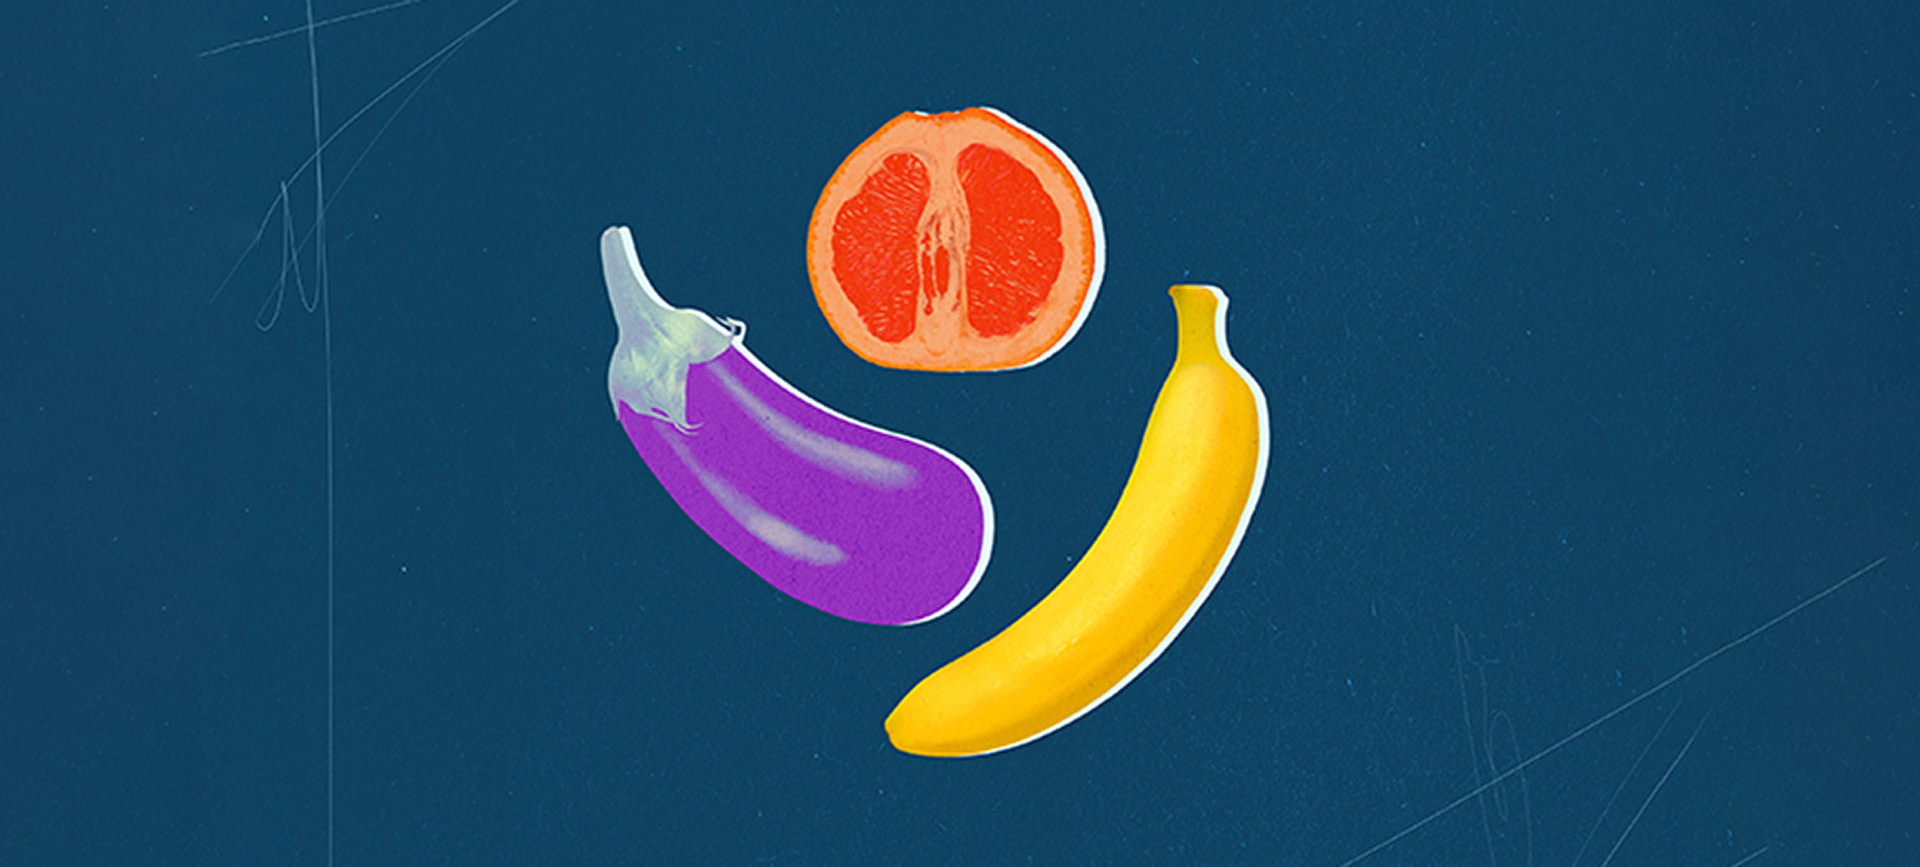 An eggplant and banana are in a circle with an open-faced grapefruit halve against a dark greenish-blue background.